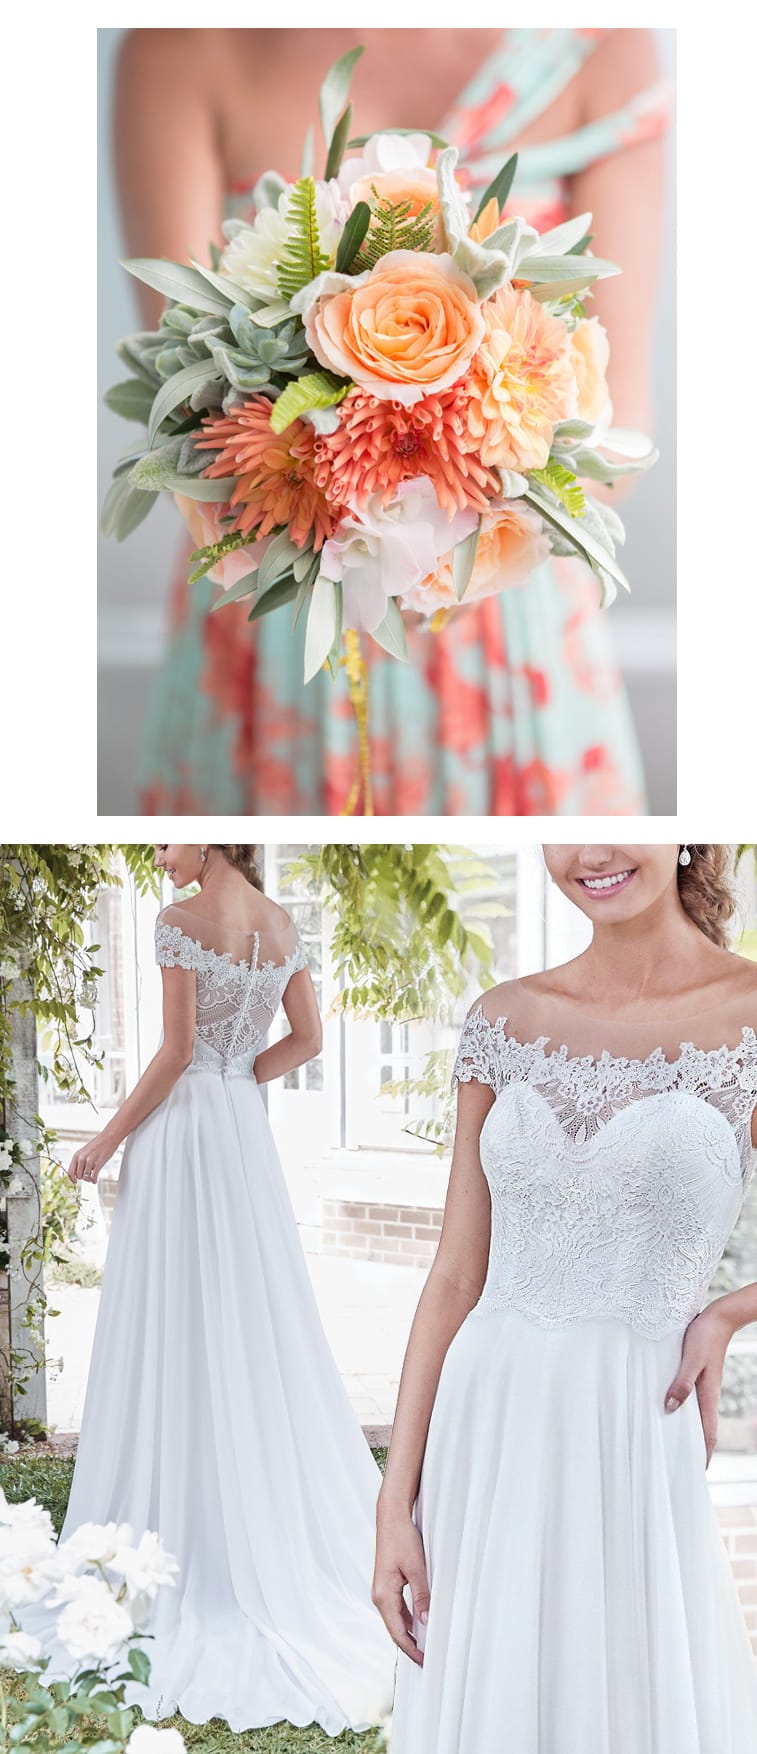 9 Bouquets For Your Boho Wedding Gown - Flirty chiffon wedding dress for boho wedding Beatrice by Rebecca Ingram. Paired with peach and coral bouquet. Photo: Amanda Thomas Photography | Bouquet/Florist: Blush